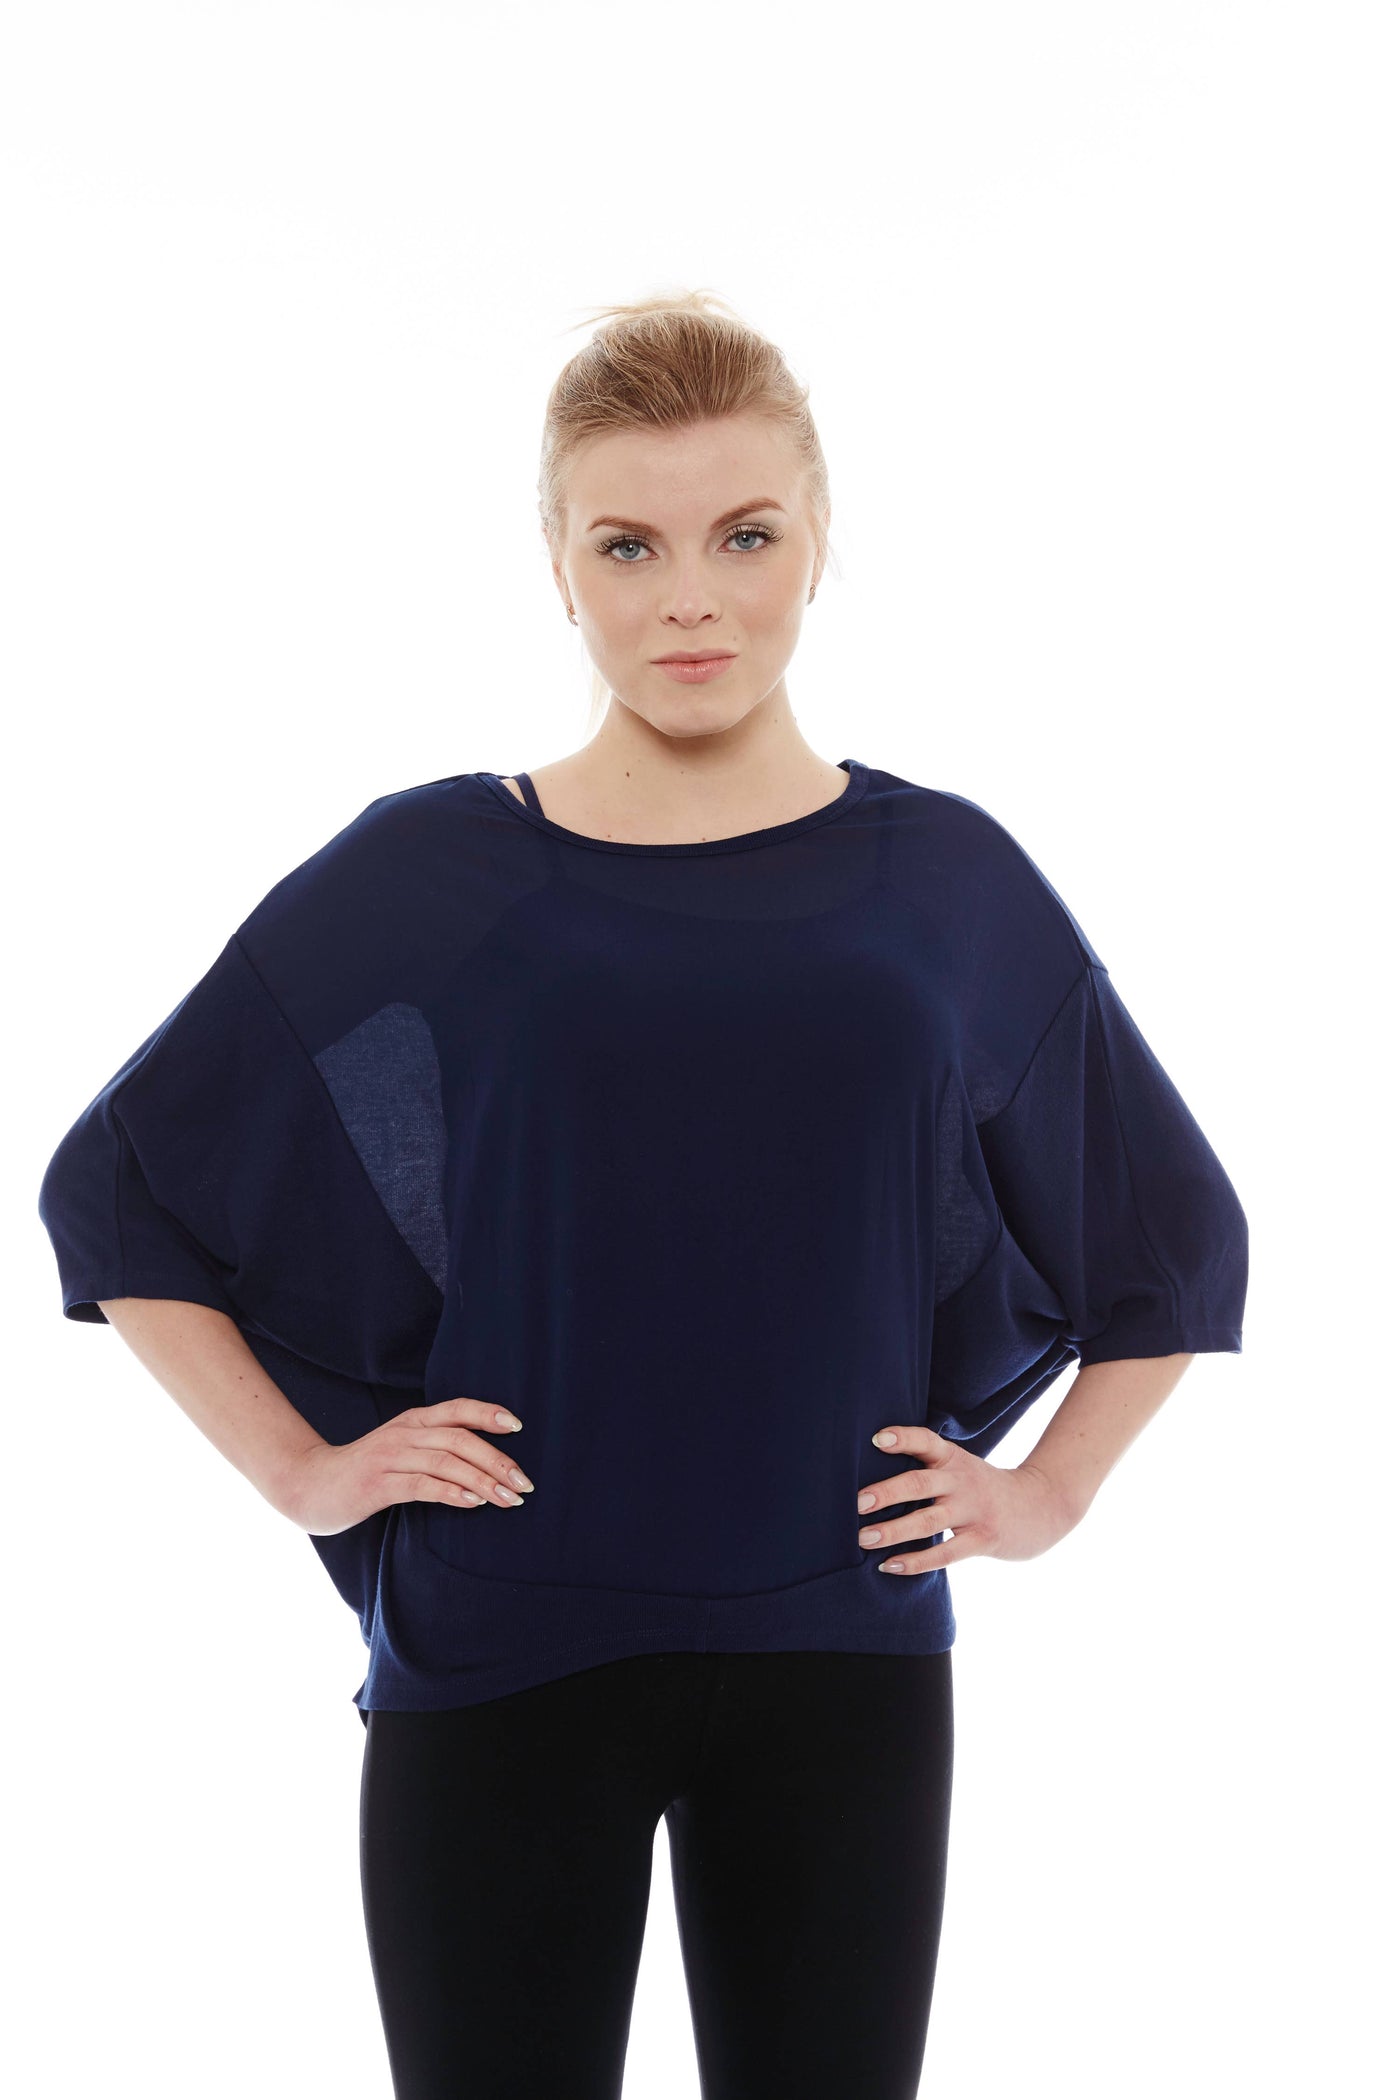 THE BLUE BATWING BAGY TOP